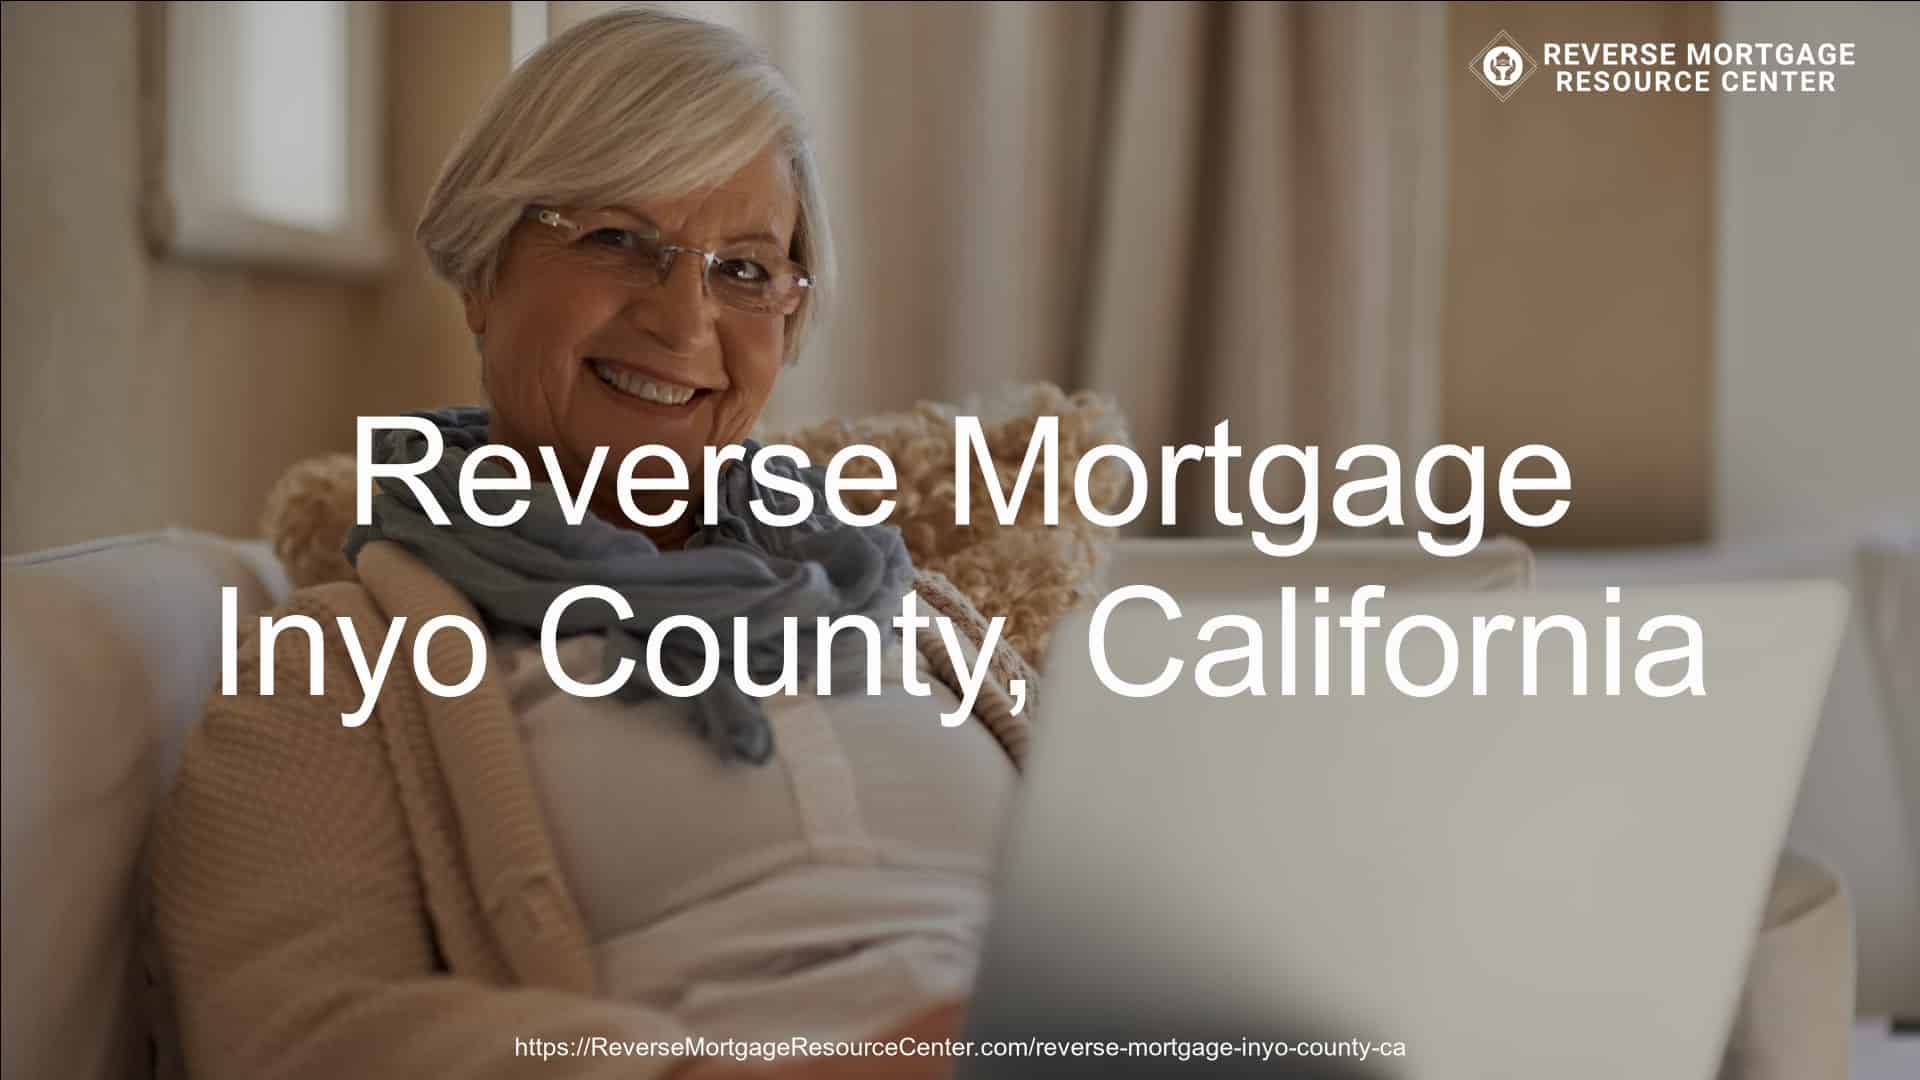 Reverse Mortgage Loans in Inyo County California